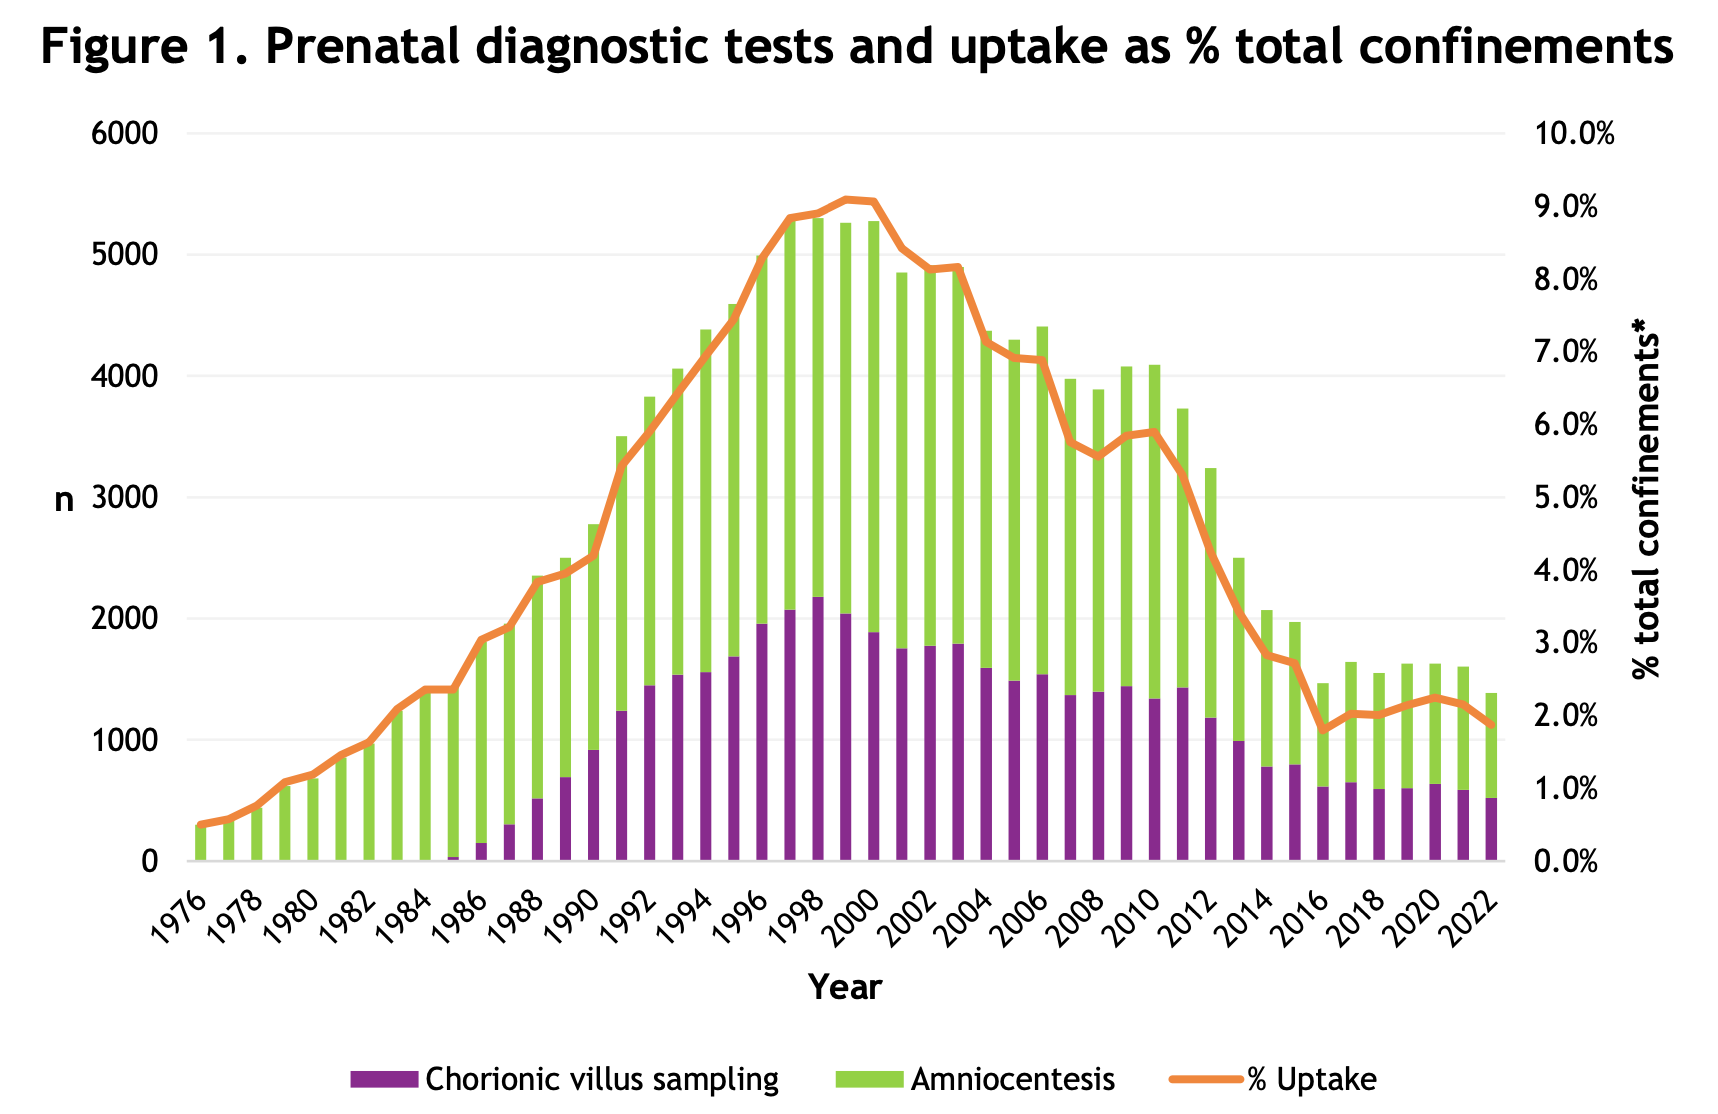 Prenatal diagnostic tests and update as % total confinements